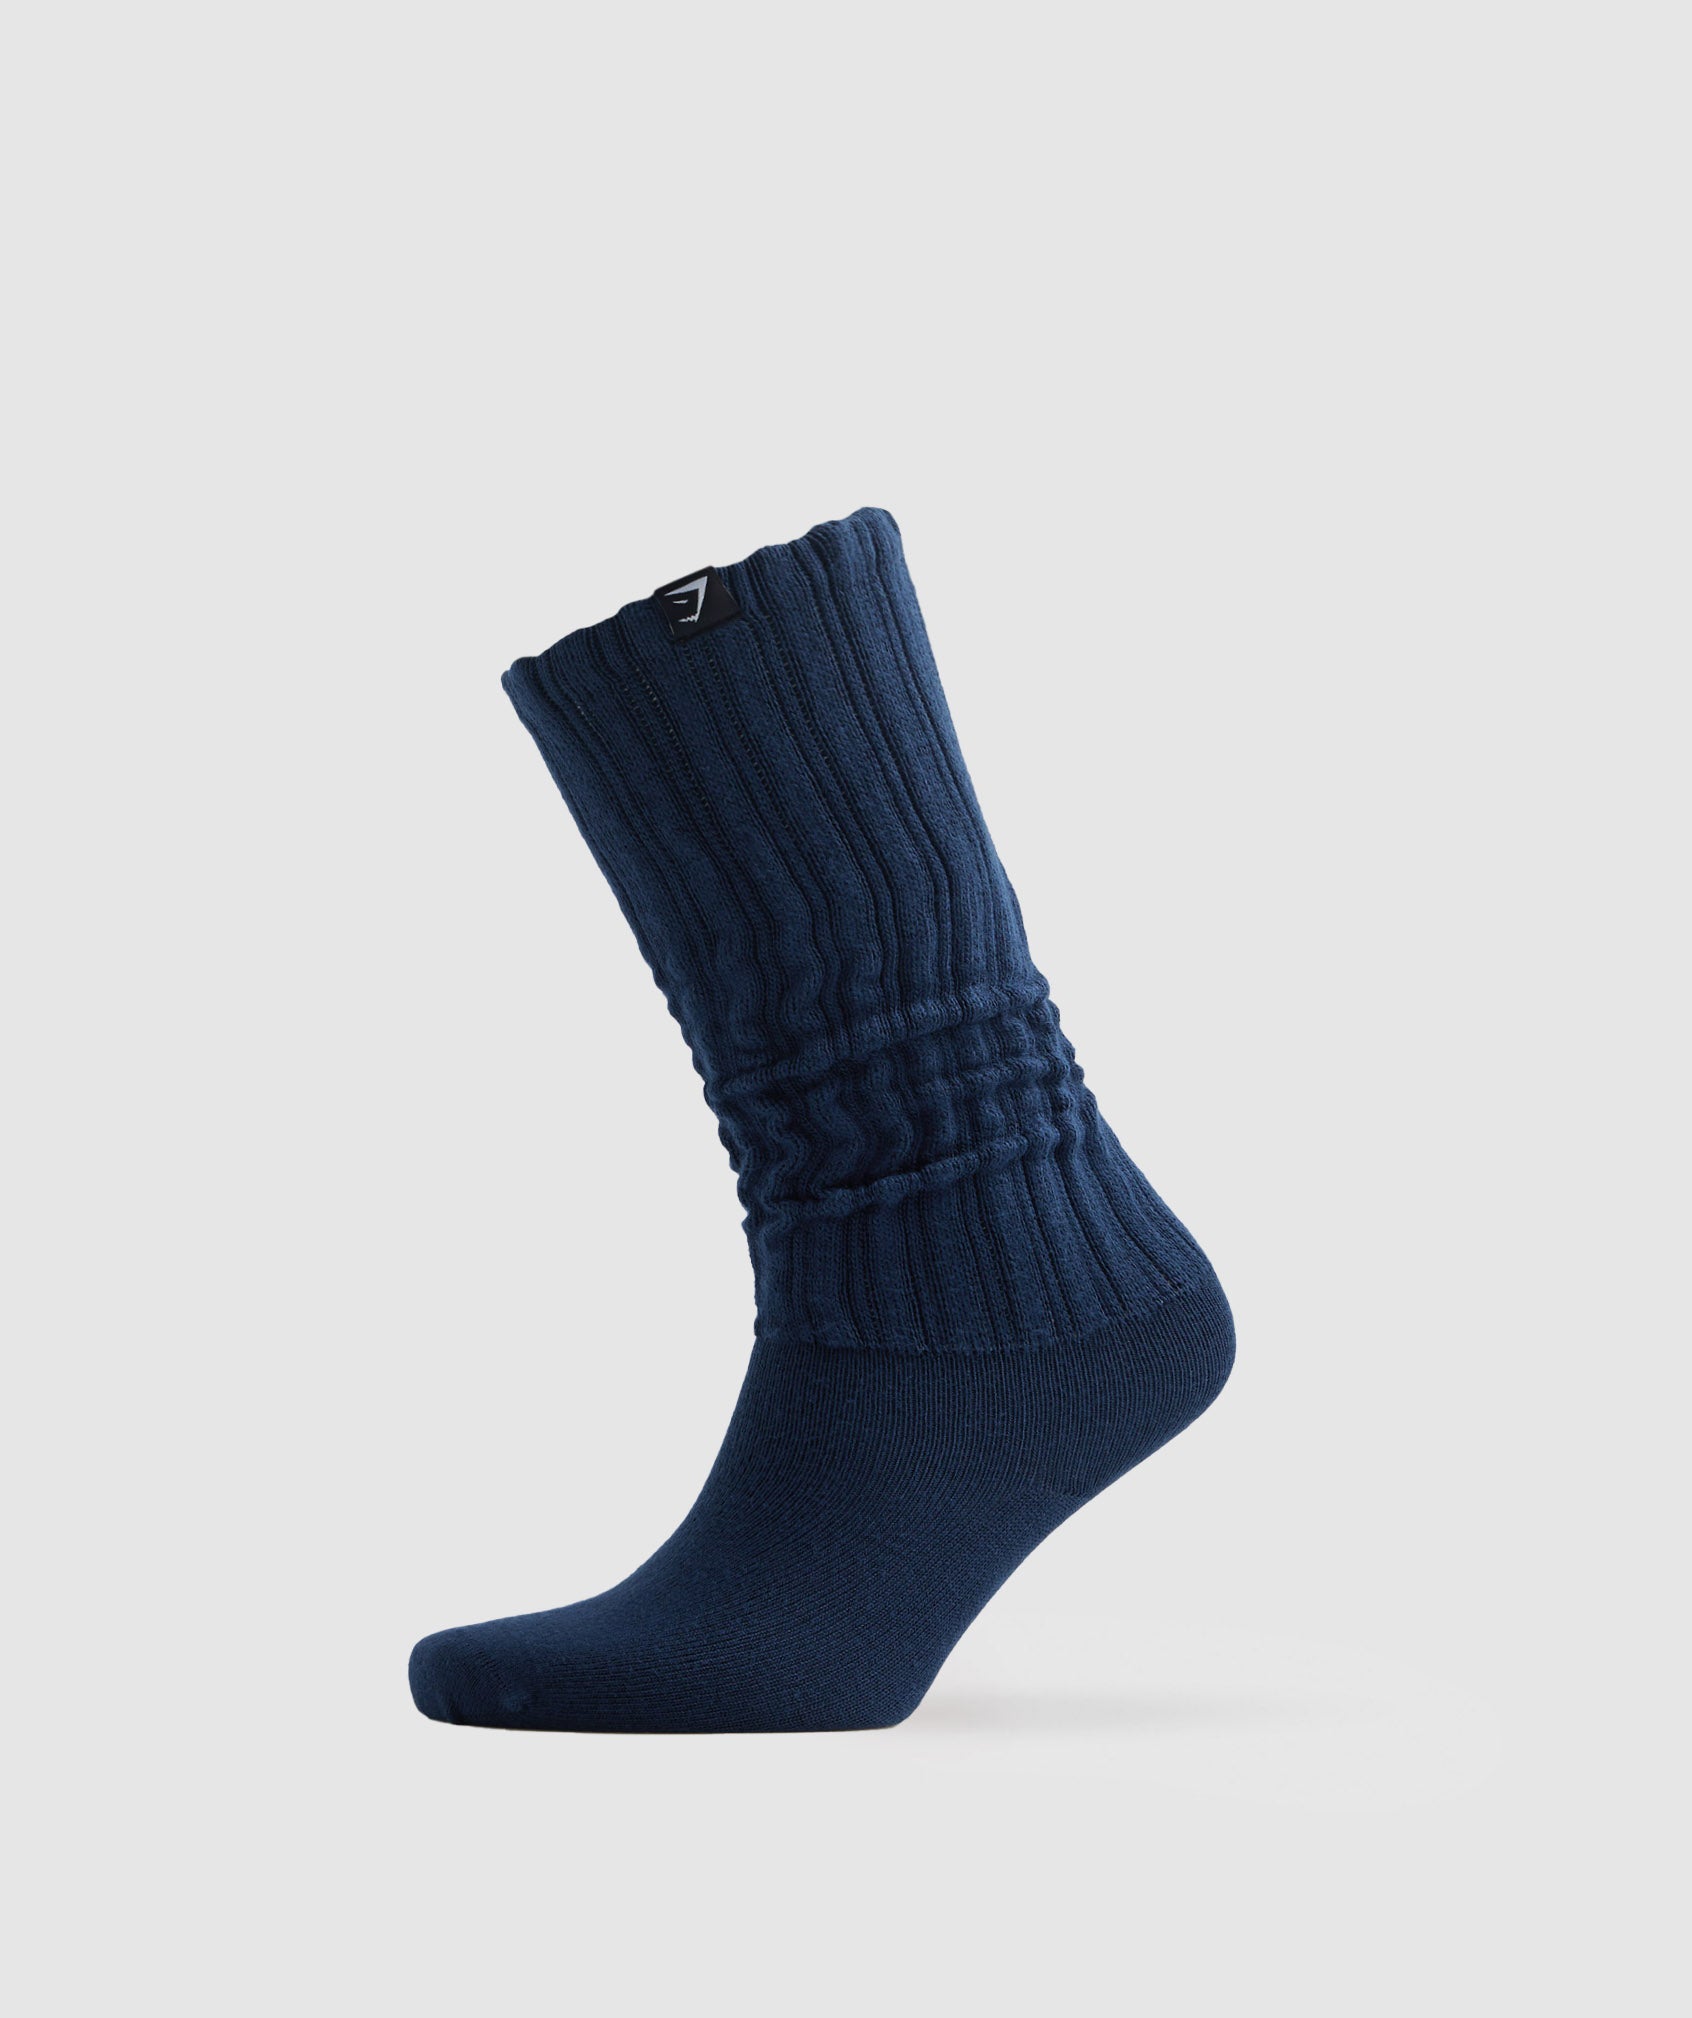 Comfy Rest Day Socks in Navy - view 1